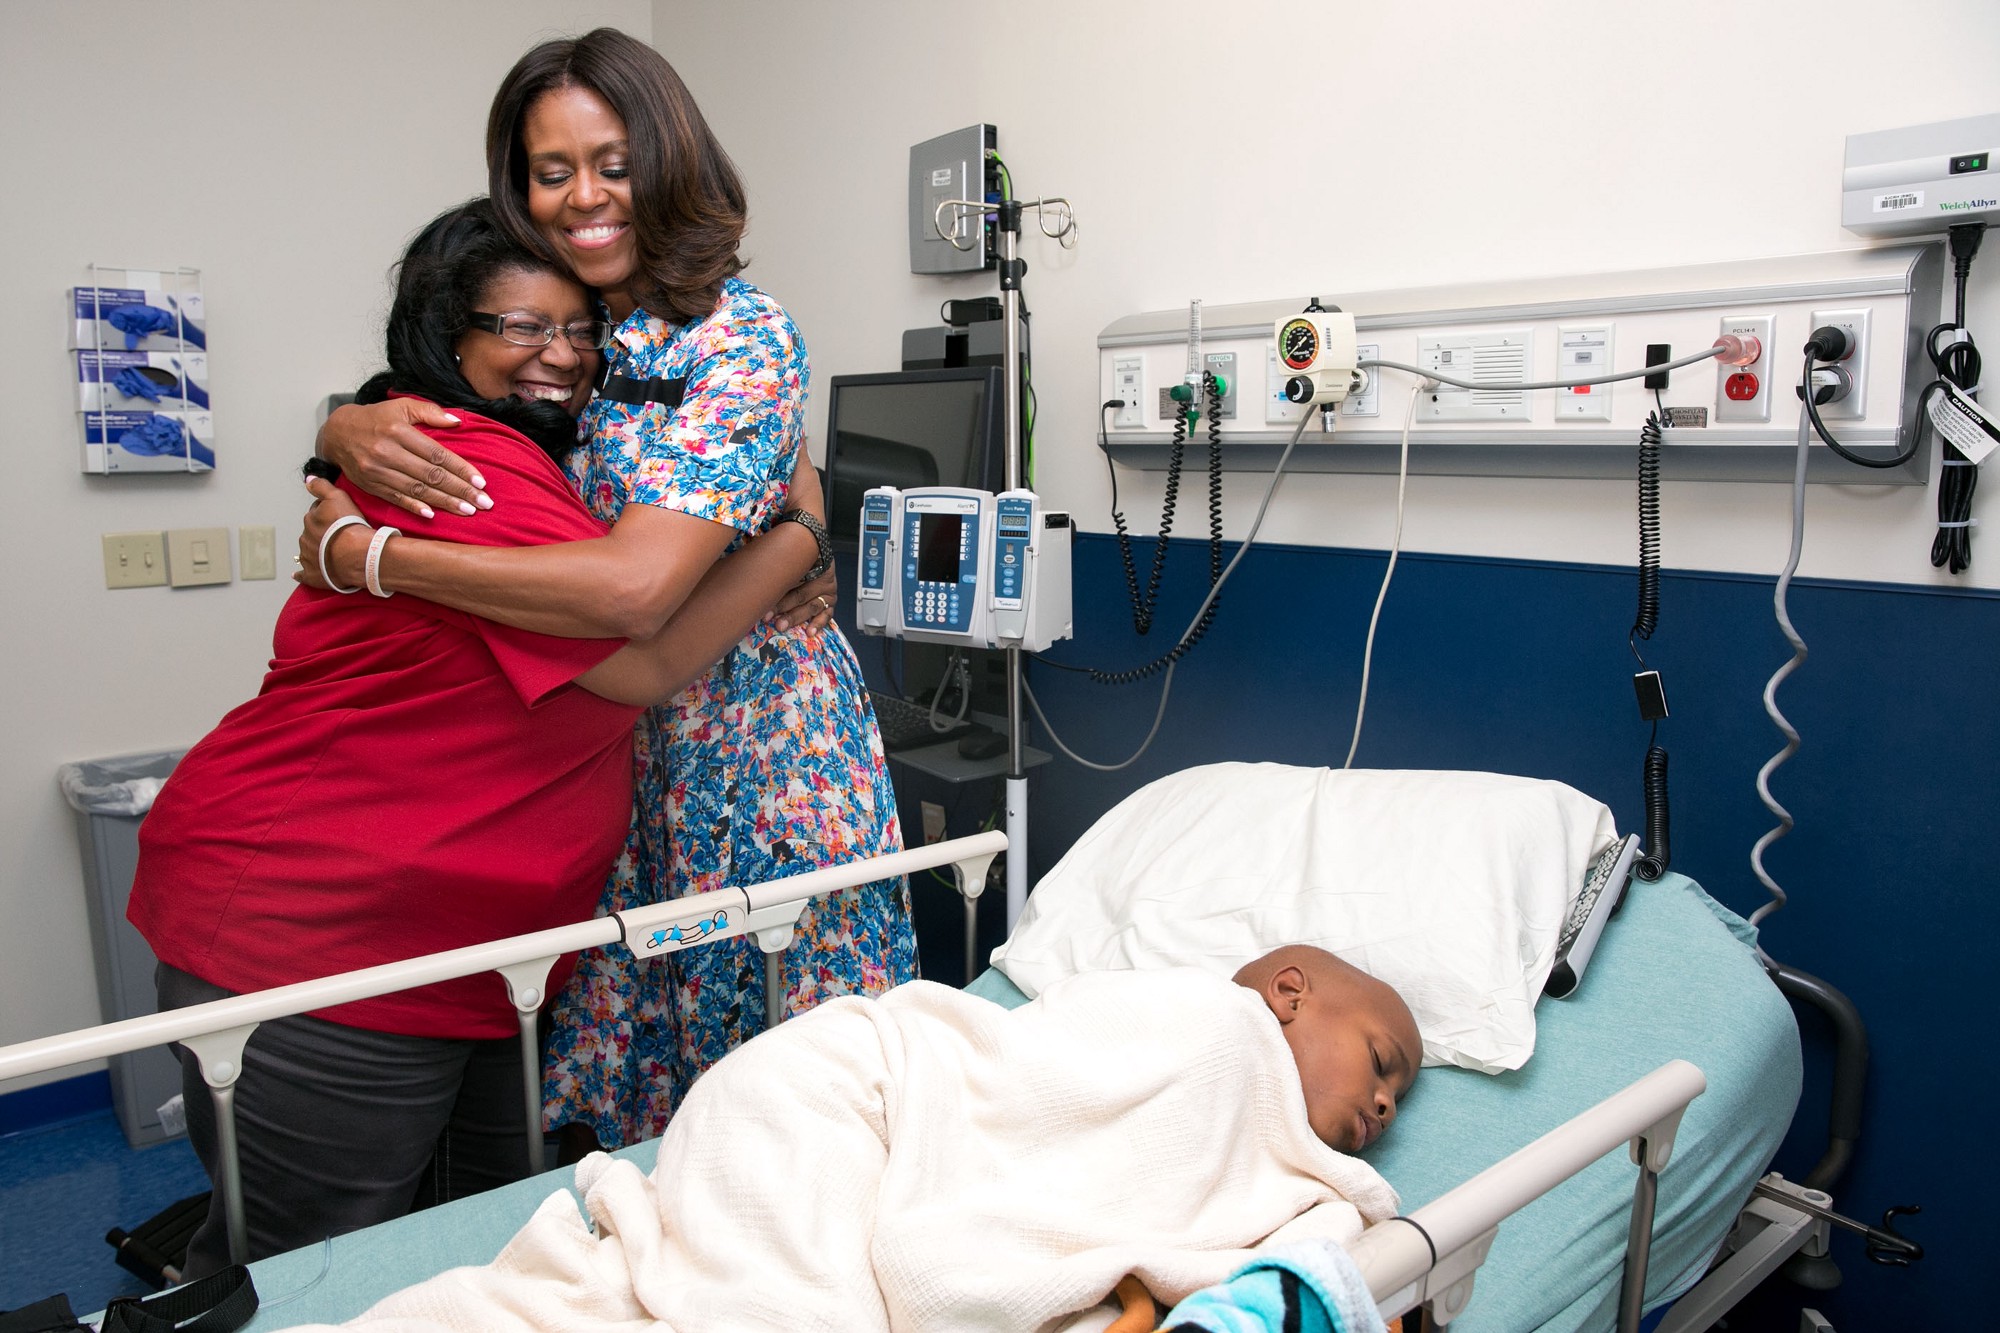 Sept. 17, 2014. Greeting the mother of patient Jamarion Daughtery at St. Jude Children’s Research Hospital in Memphis, Tenn. (Official White House Photo by Amanda Lucidon)